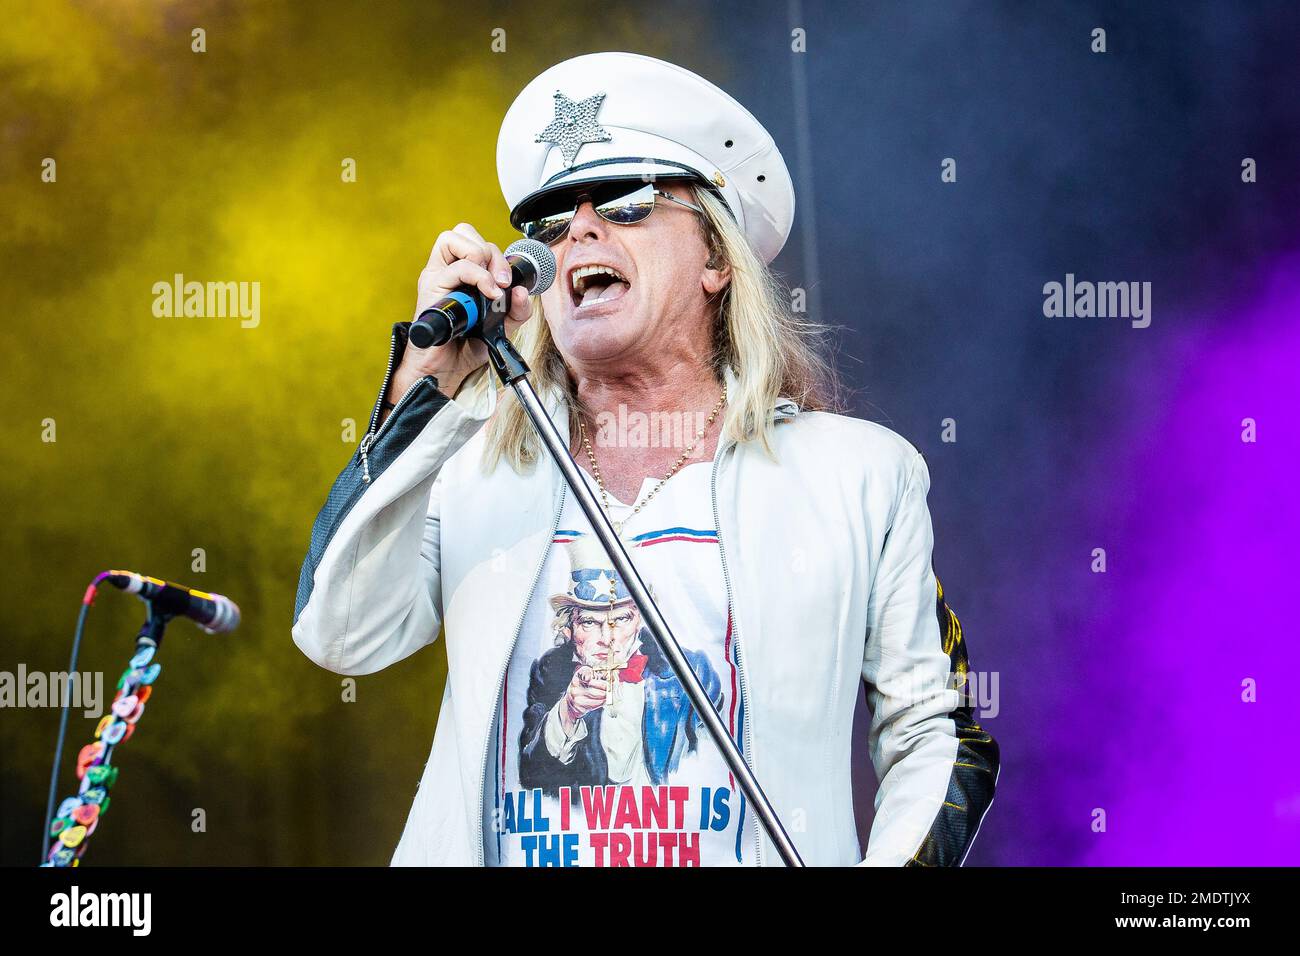 Robin Zander of Cheap Trick performing live on stage Stock Photo